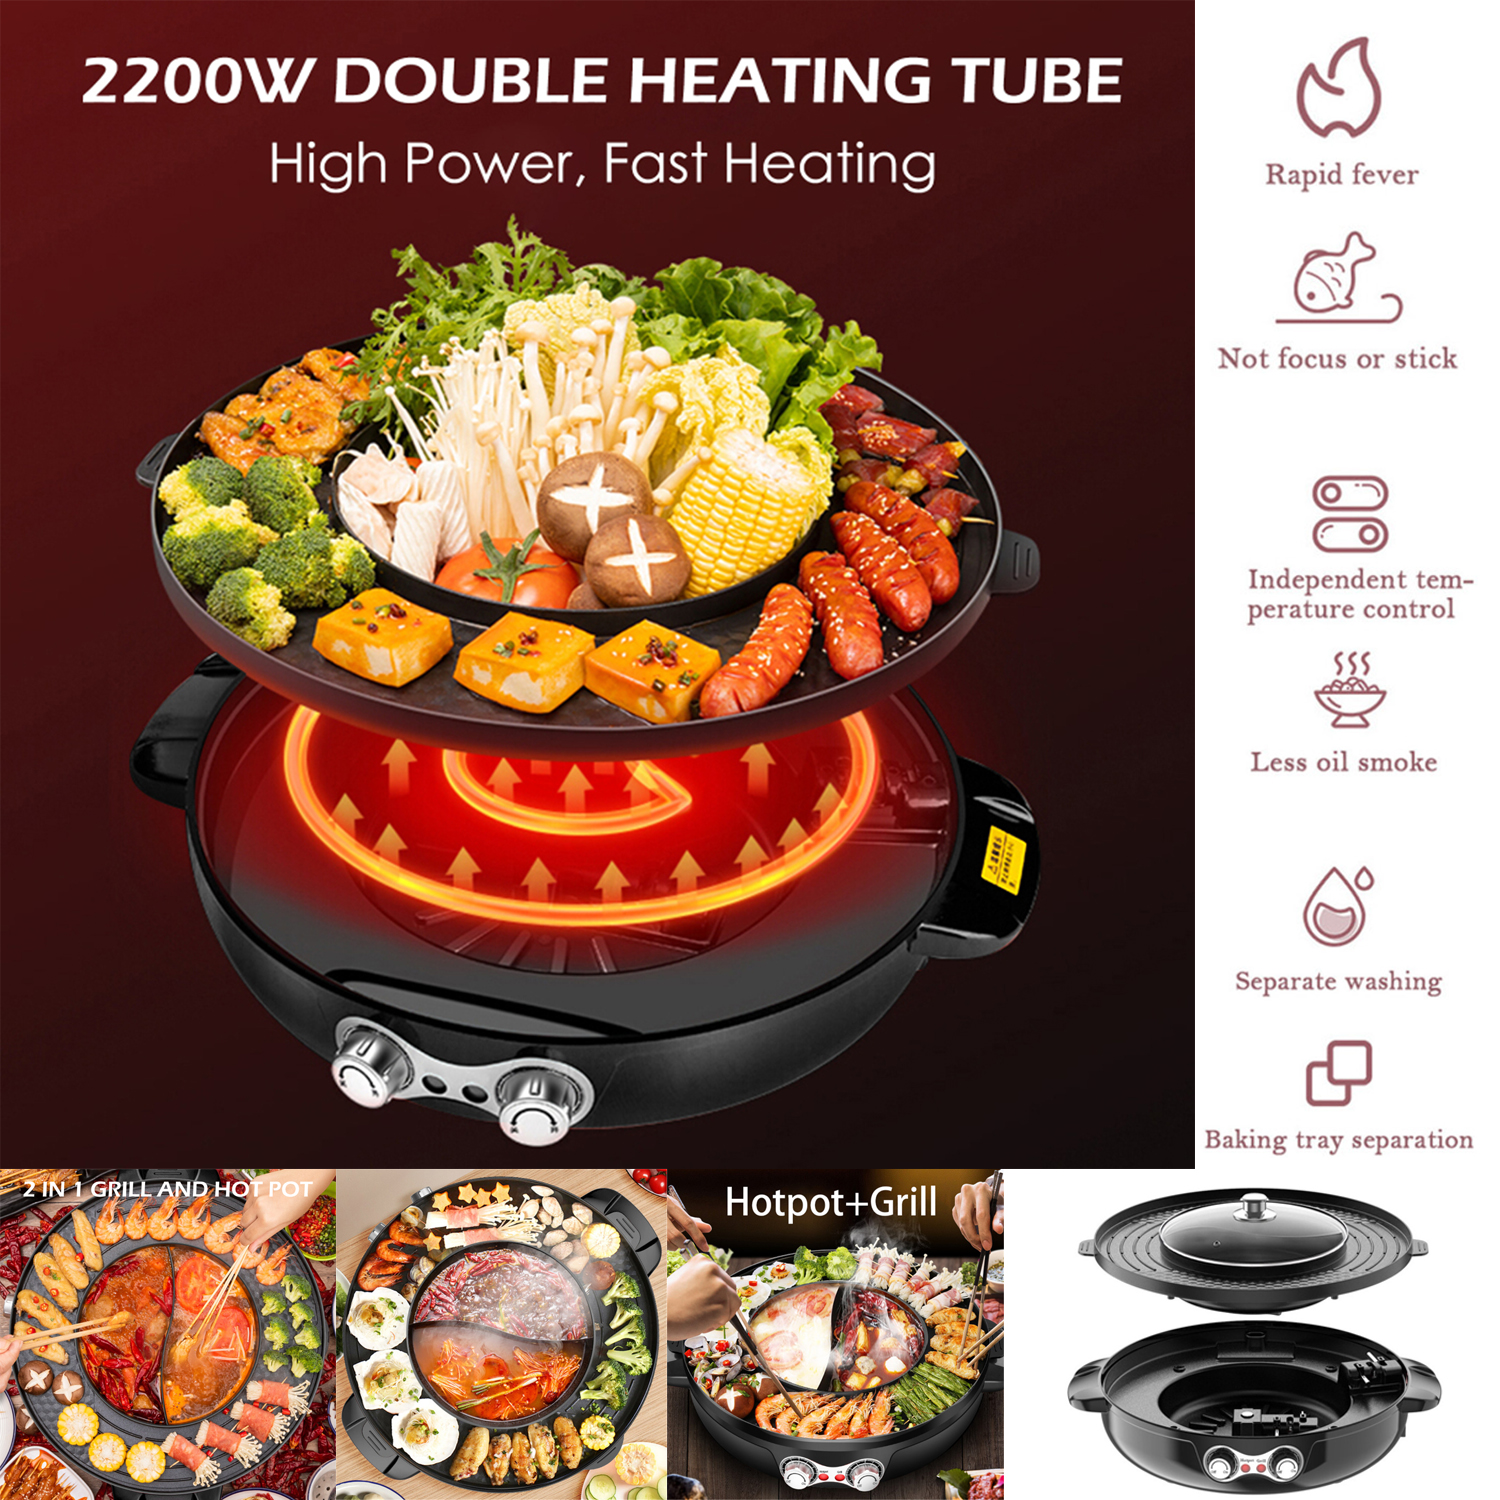 2200W 2 in 1 Electric Smokeless Grill and Hot Pot 110V Split Easy Cleaning Dual Temperature Control 